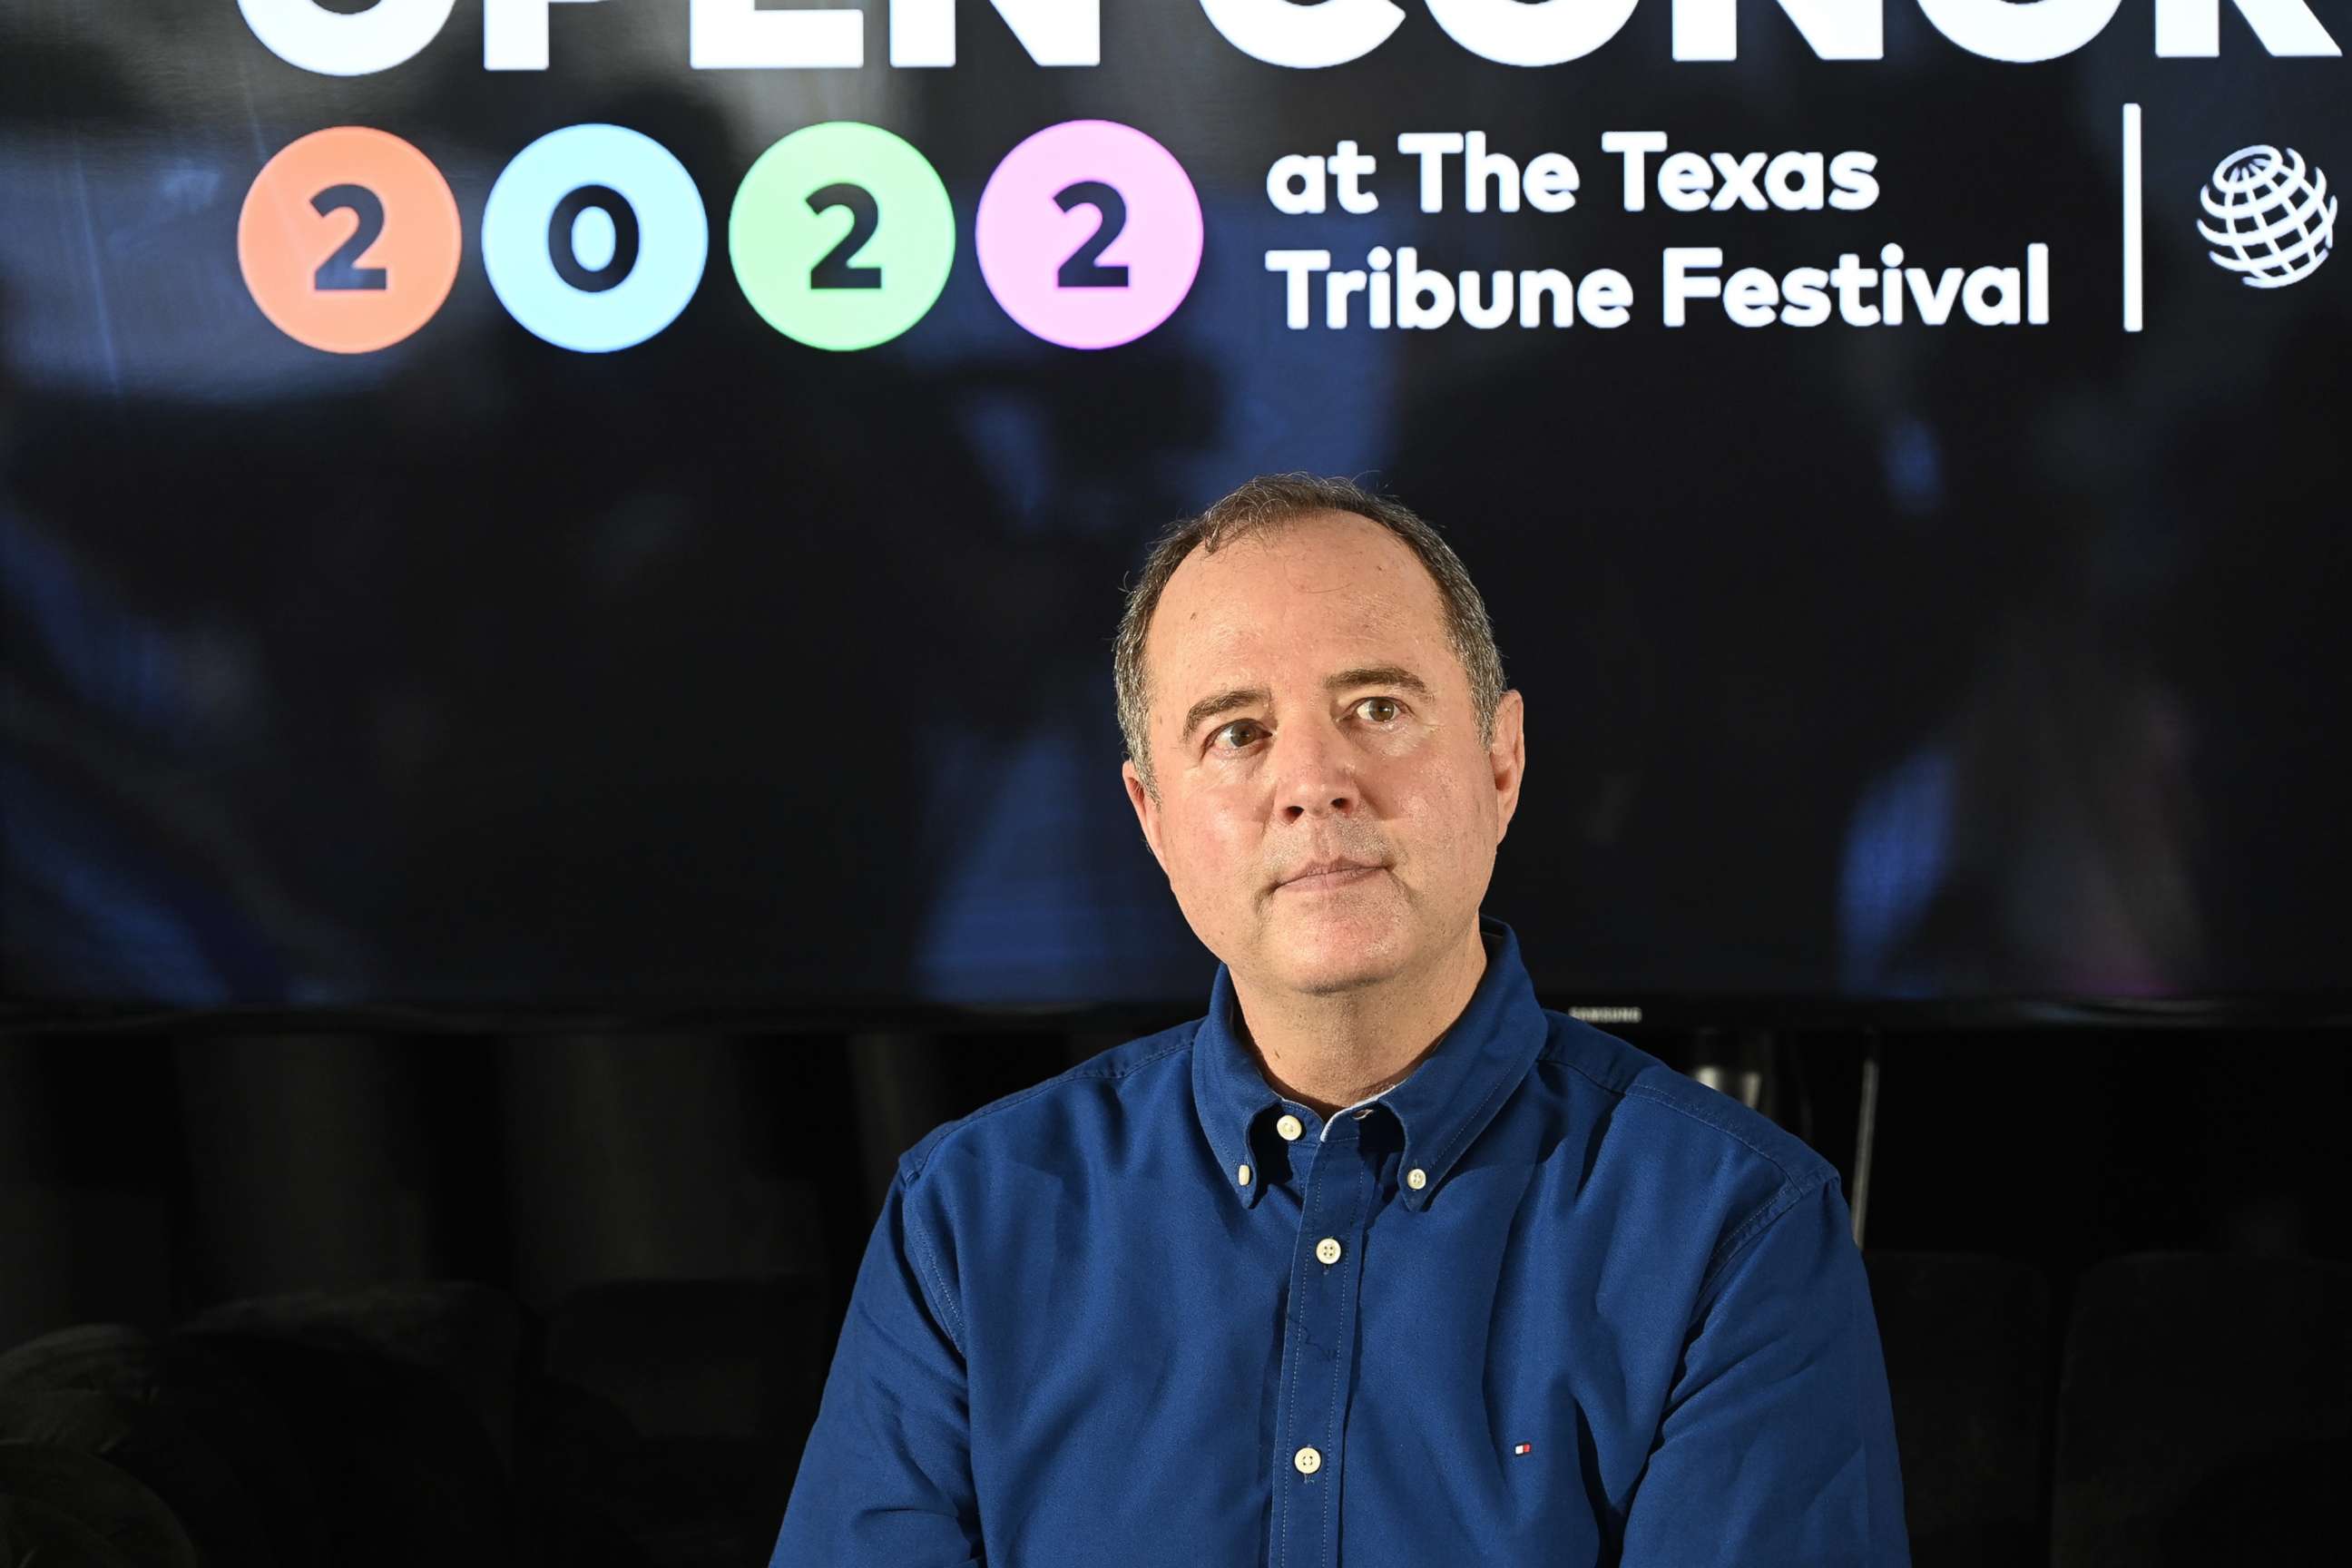 PHOTO: Rep. Adam Schiff answers audience questions about his role in the January 6th Committee and other obligations in the U.S. House at the Saturday morning sessions of the Texas Tribune Festival in Austin, Texsas, Sept. 24, 2022.